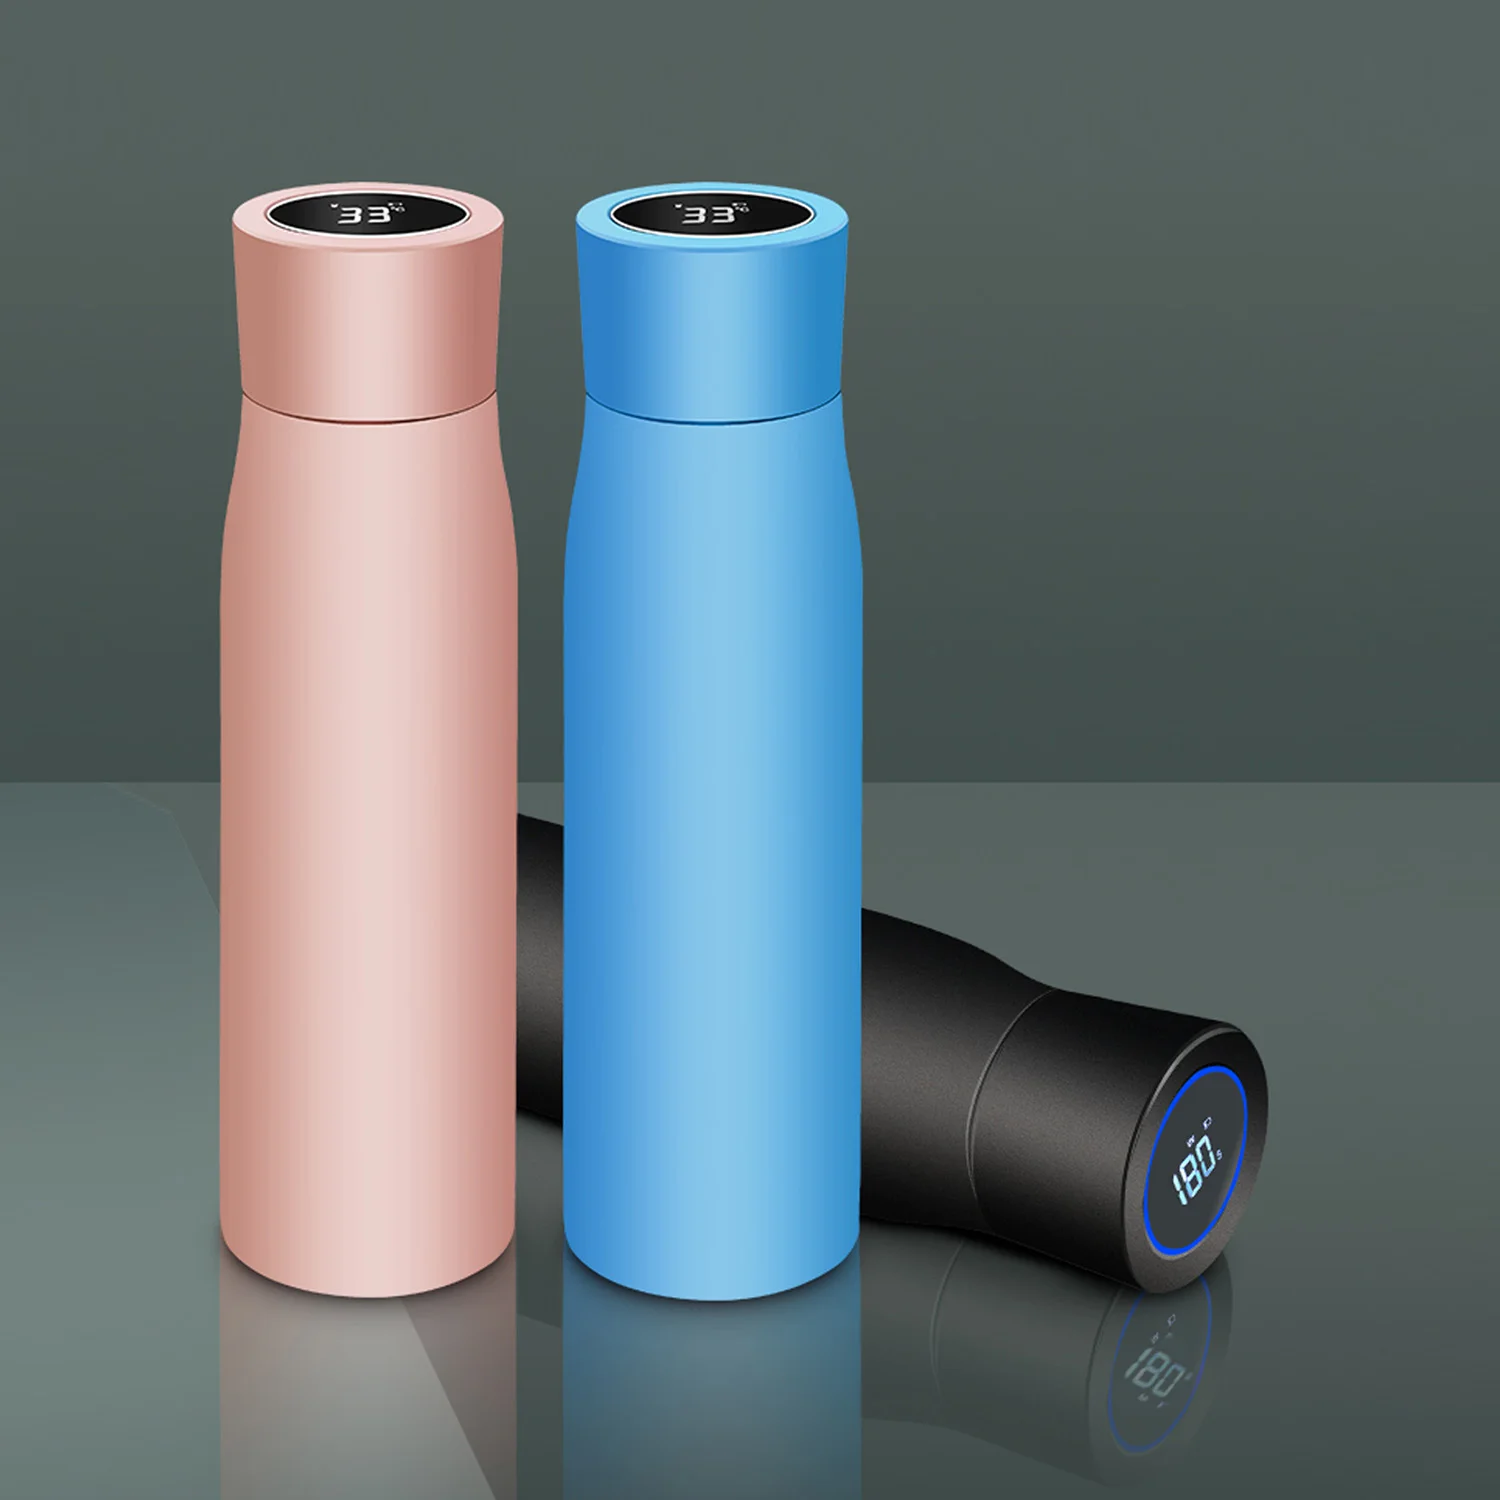 

UV Sterilizing Purifier Portable Smart Insulation Cup Car Heater Tumbler Stainless Steel Self Cleaning UV Water Bottle